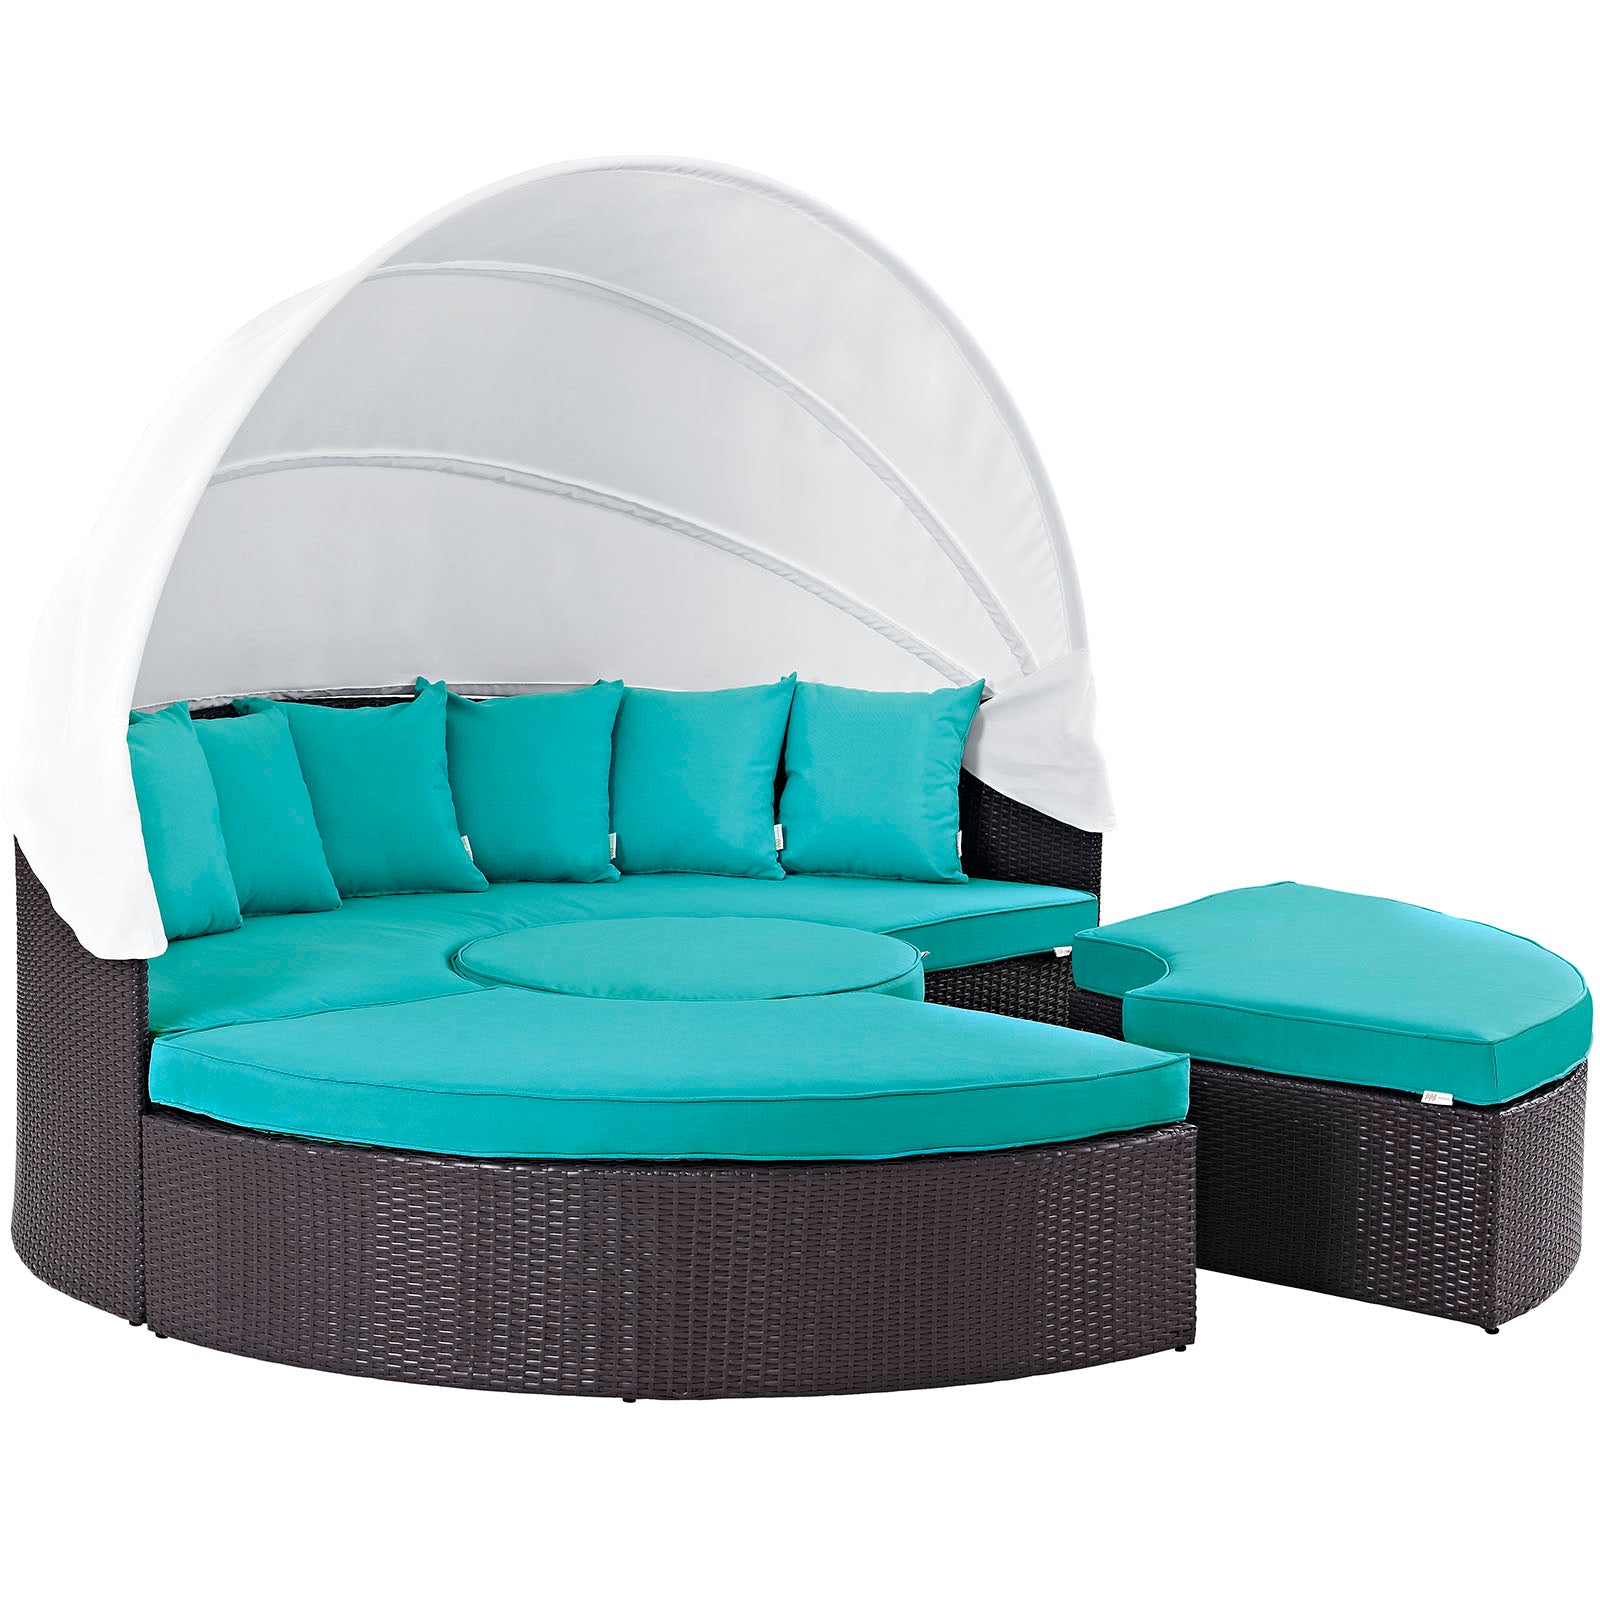 Modway - Convene Canopy Outdoor Patio Daybed - EEI-2173